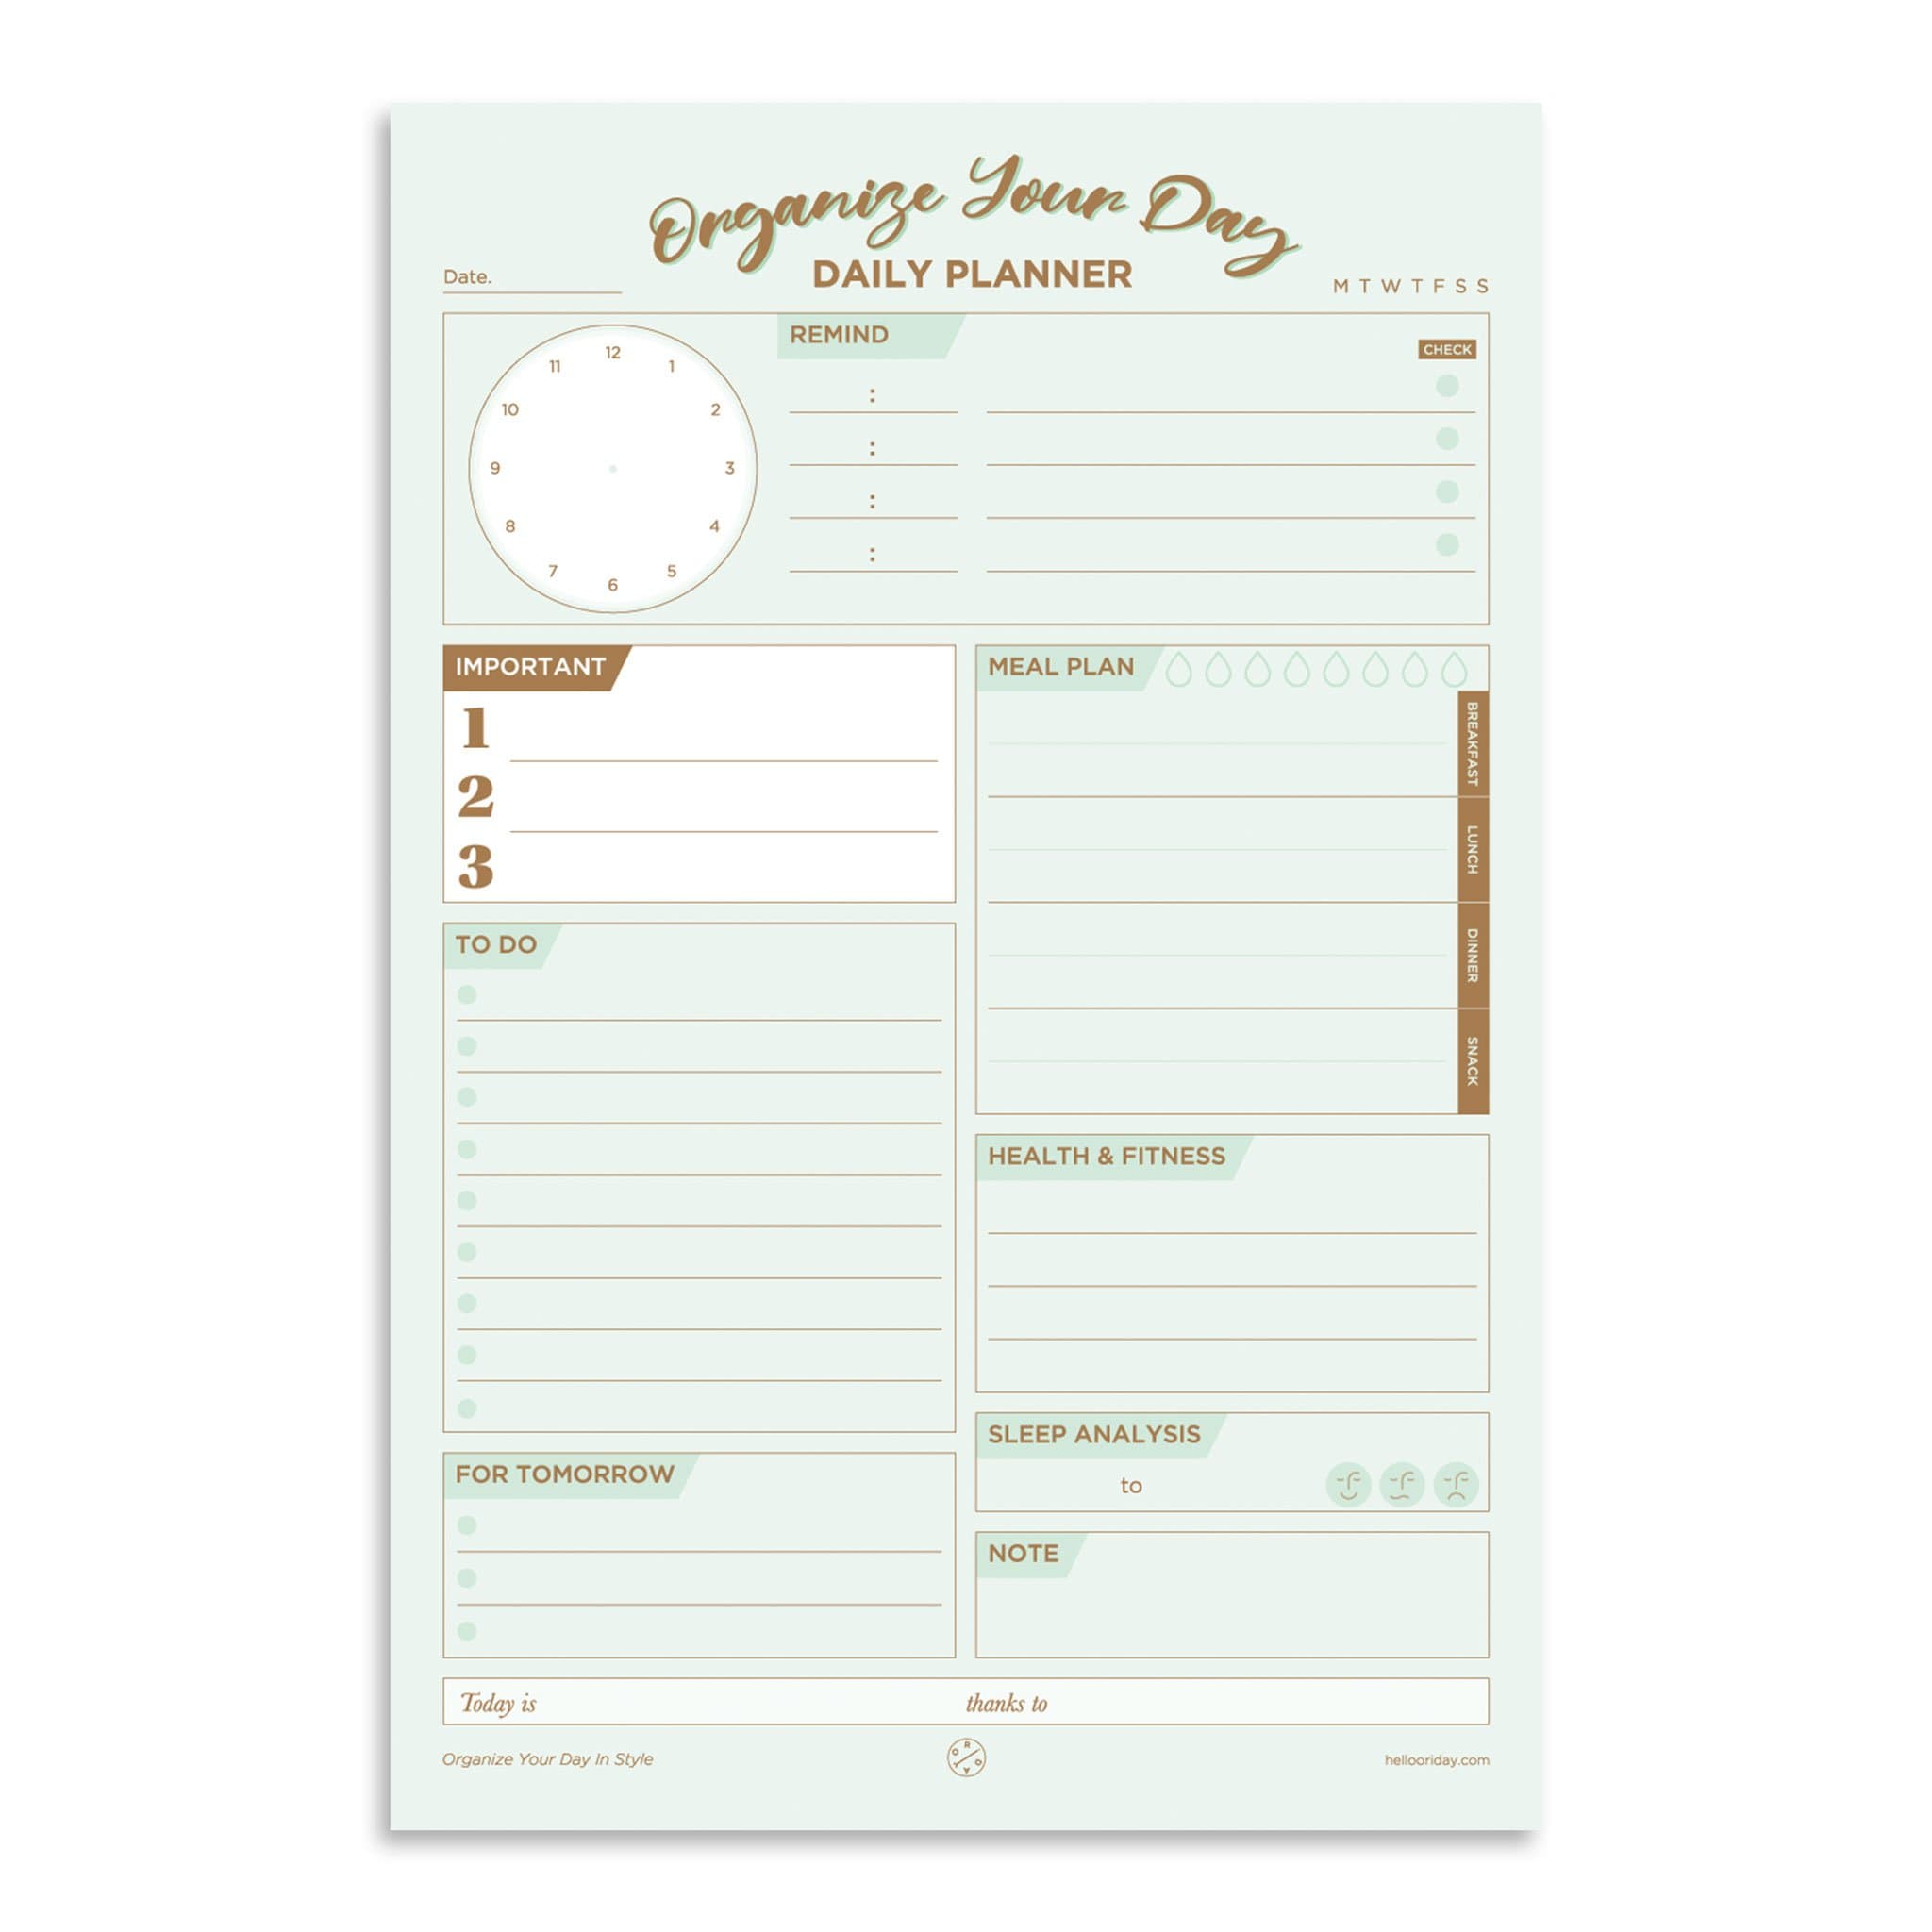 Daily Planner Notepad With 80 Undated Tear-Off Pages 6x9in., Daily